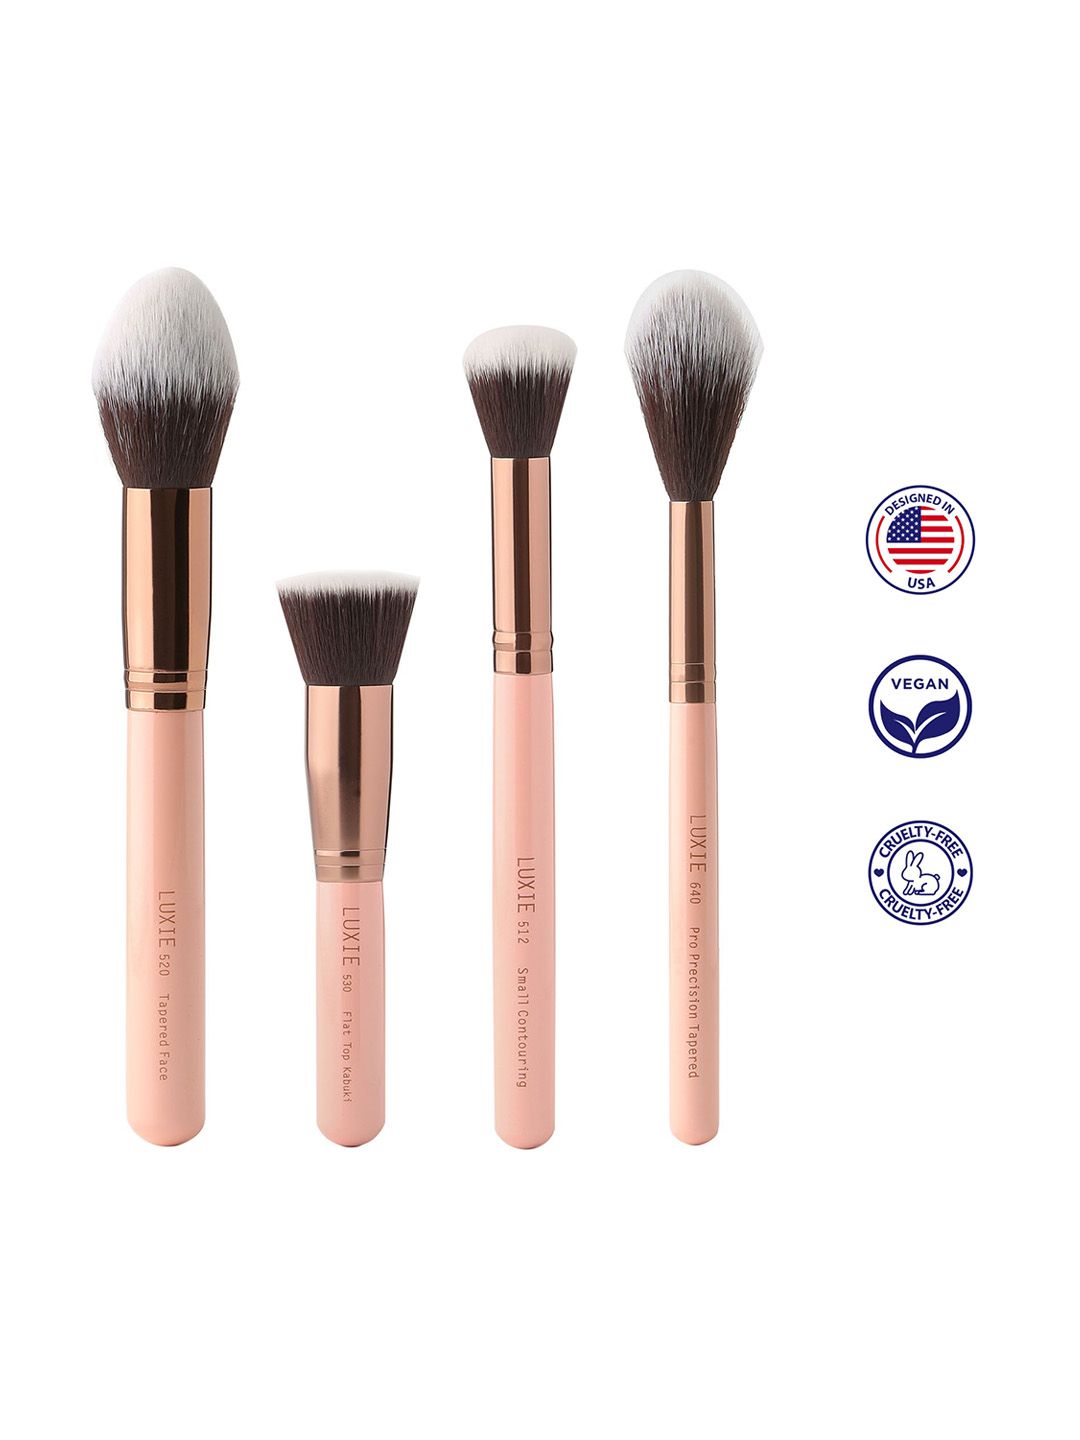 LUXIE Set of 4 Rose Gold Powder Contour Makeup Brushes Price in India